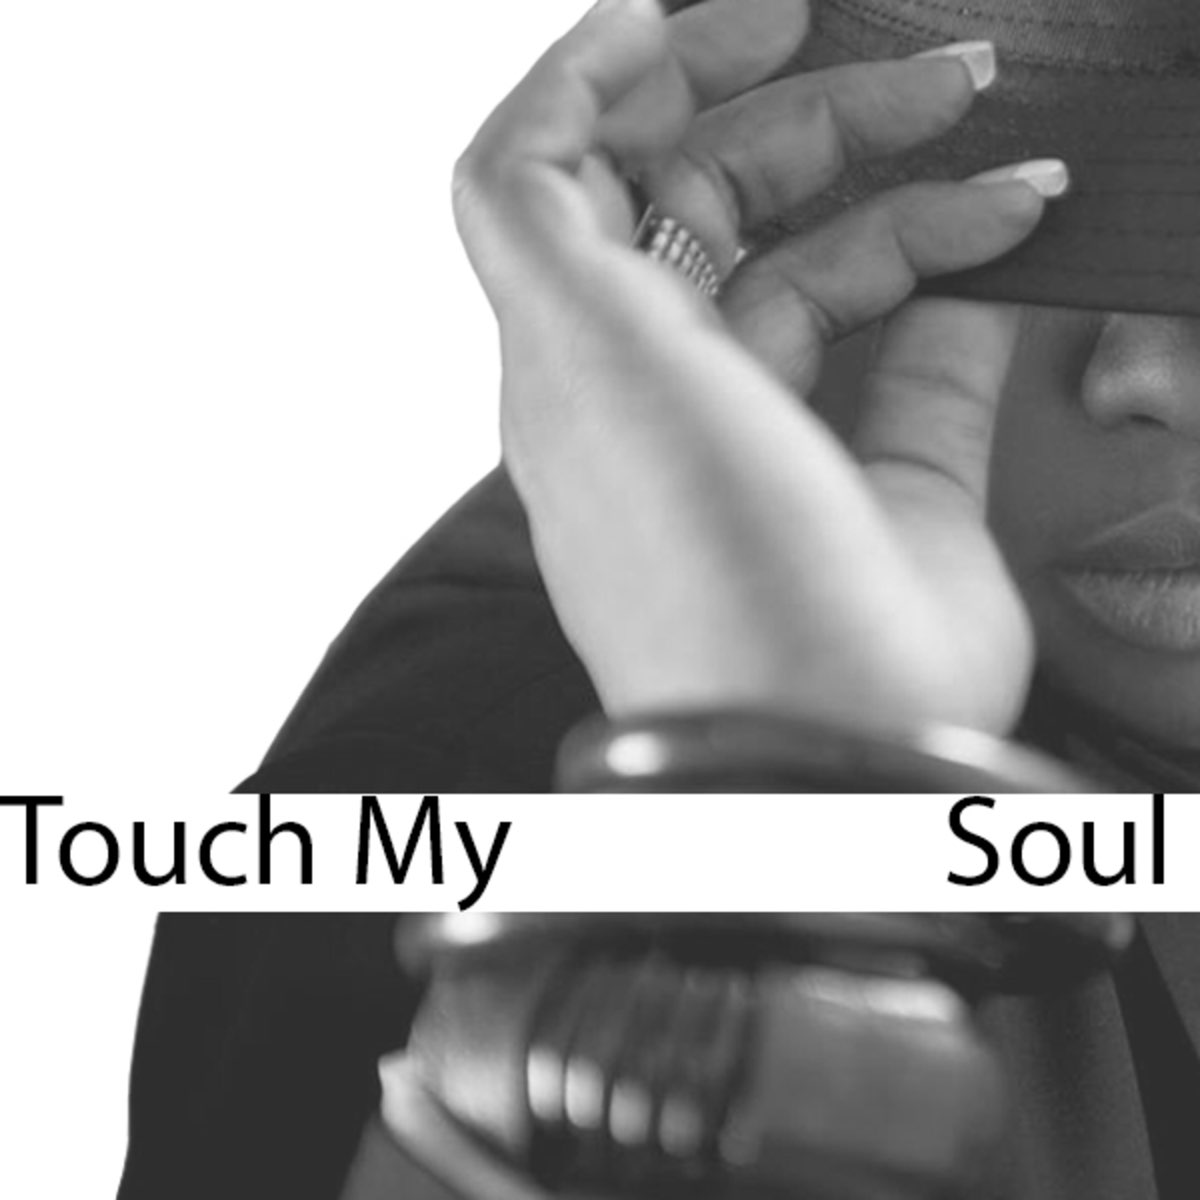 Touching song. Touch my Soul. Touch my Soul картина. Can Touch my Soul. A Soul to Touch.